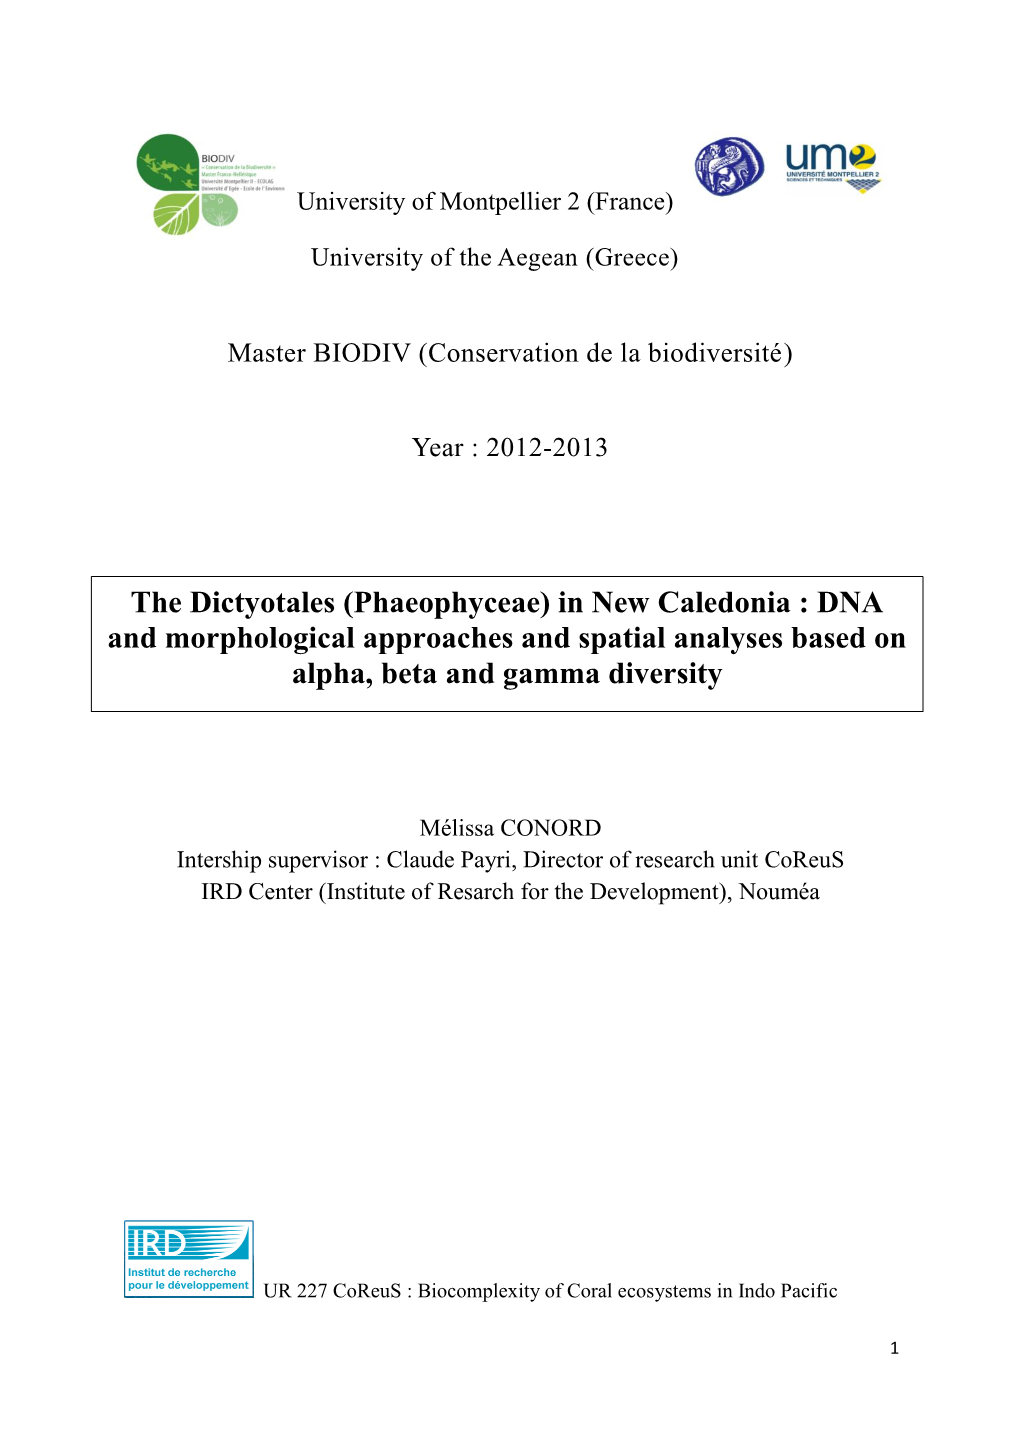 The Dictyotales (Phaeophyceae) in New Caledonia : DNA and Morphological Approaches and Spatial Analyses Based on Alpha, Beta and Gamma Diversity